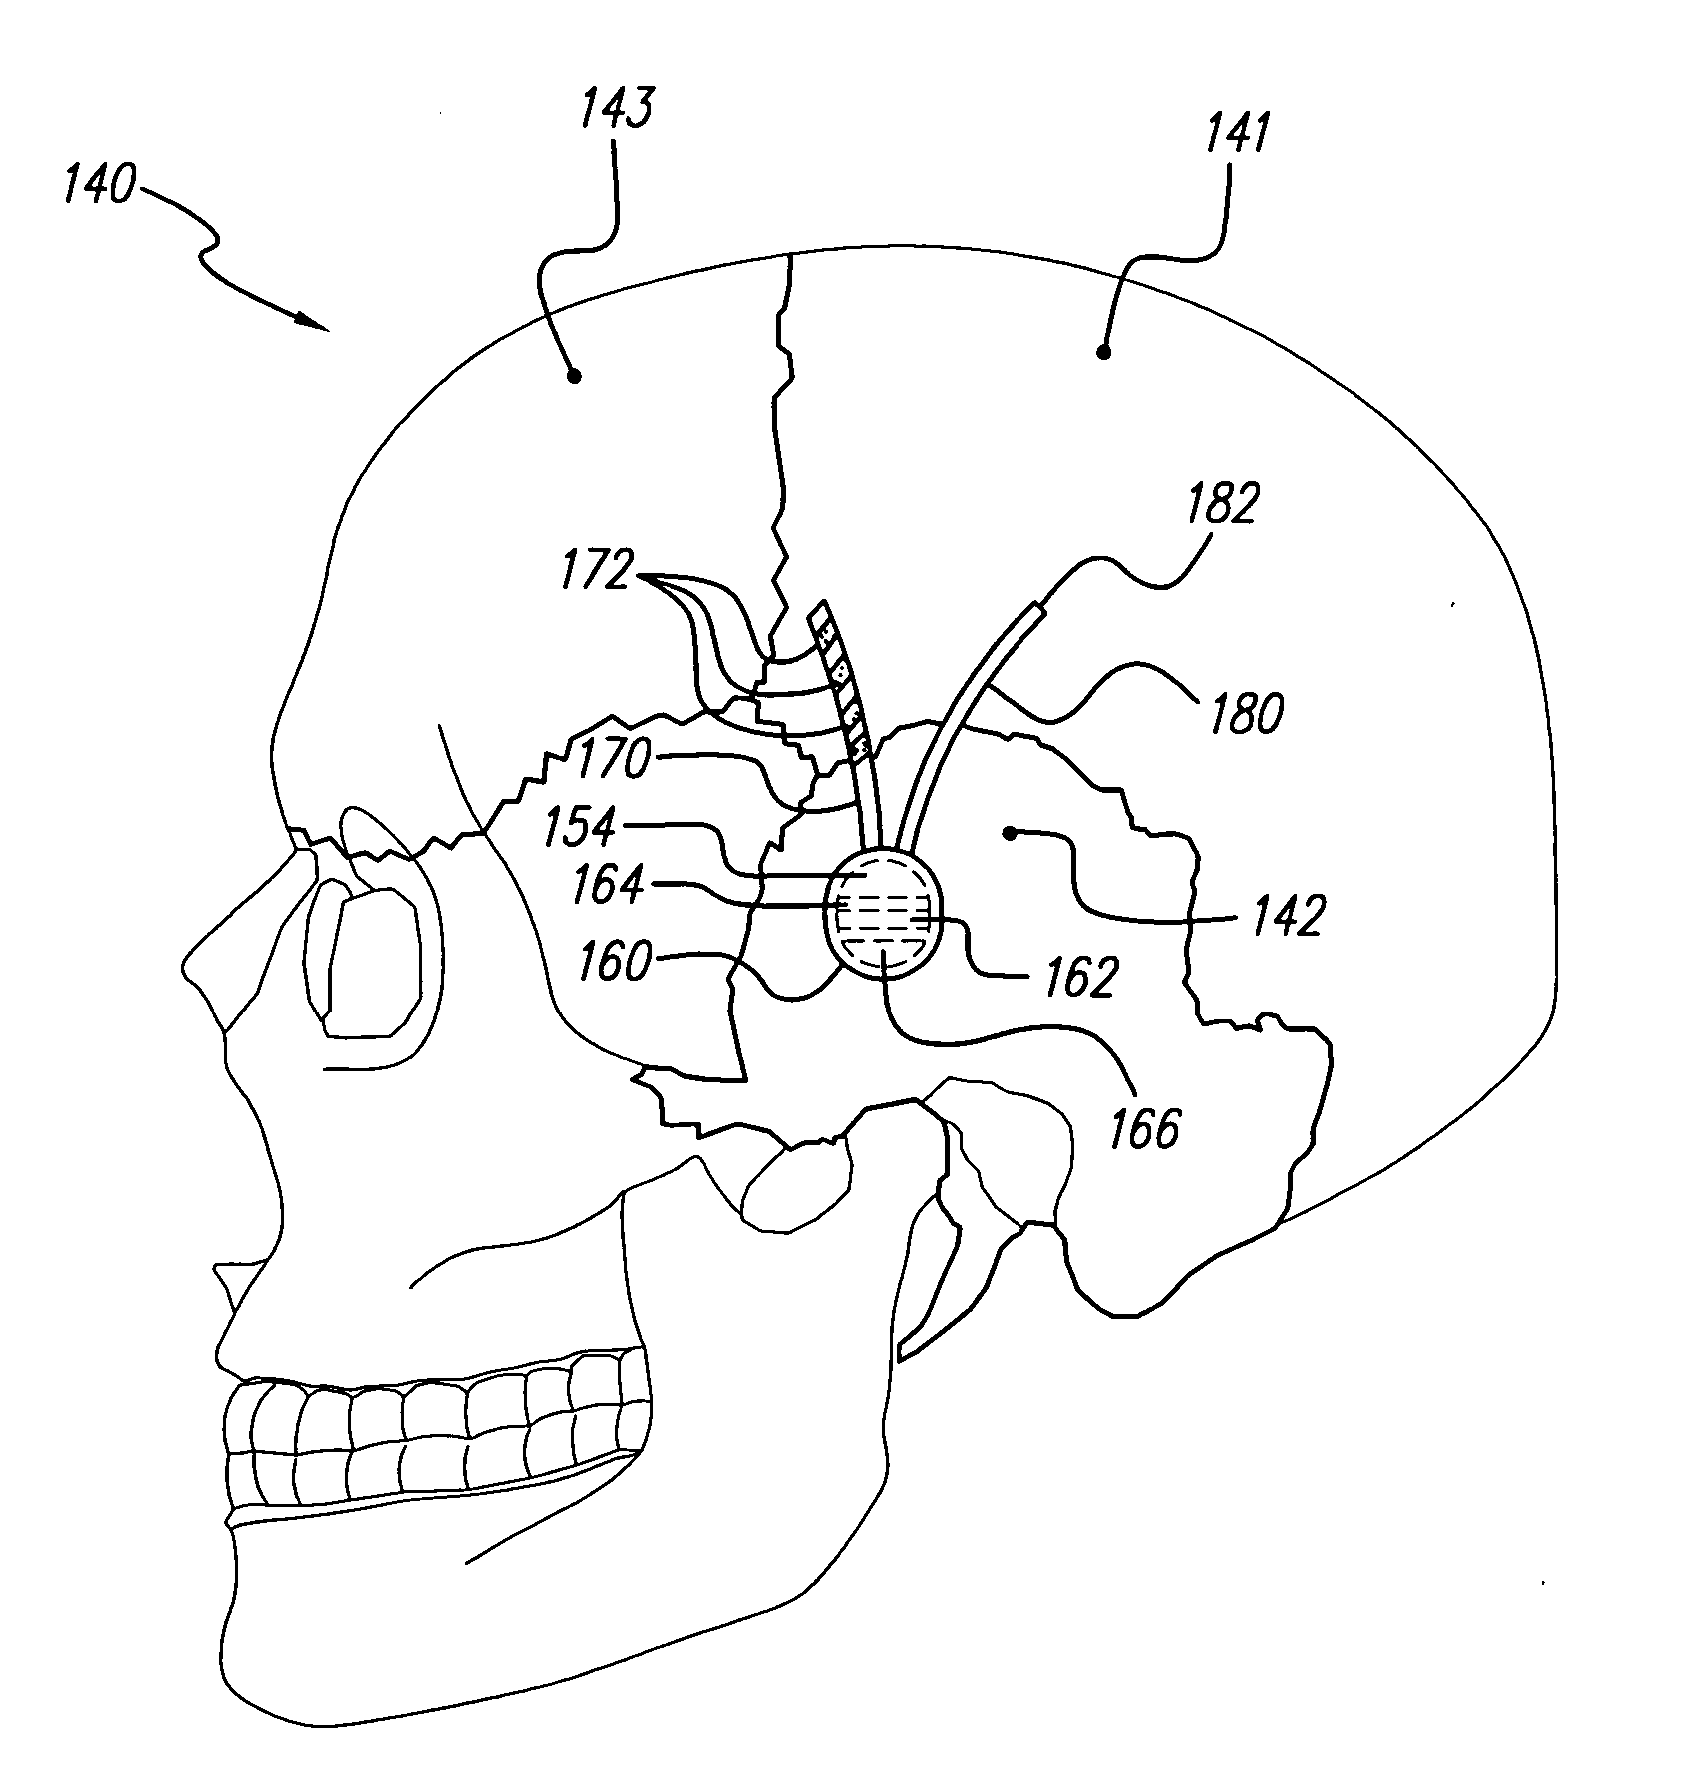 Systems and methods for trestment of obesity and eating disorders by electrical brain stimulation and/ or drug infusion